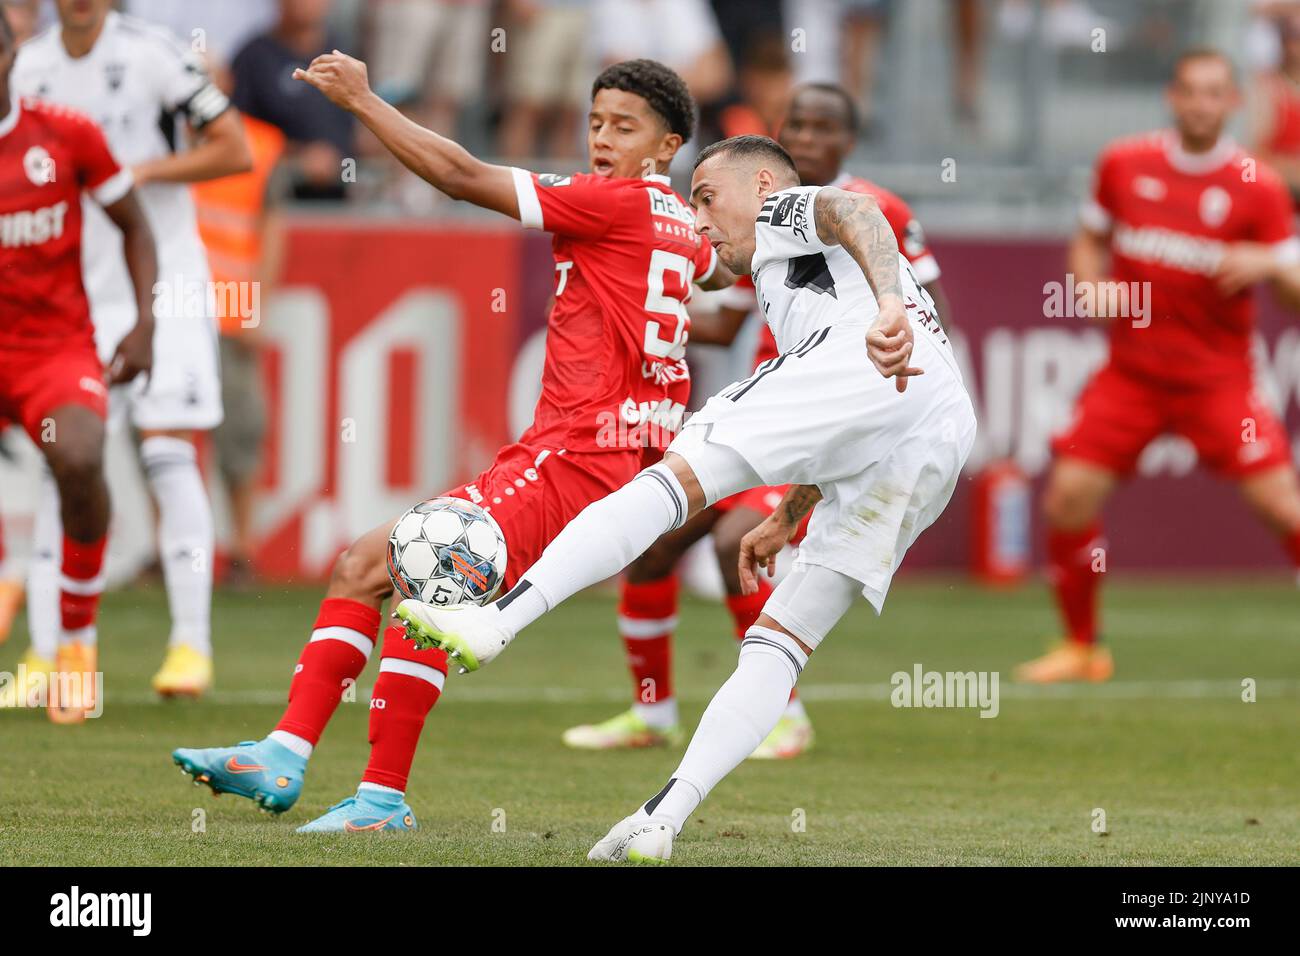 Eupen's Jason Davidson pictured in action during a soccer match between KAS Eupen and Royal Antwerp FC RAFC, Sunday 14 August 2022 in Eupen, on day 4 of the 2022-2023 'Jupiler Pro League' first division of the Belgian championship. BELGA PHOTO BRUNO FAHY Stock Photo